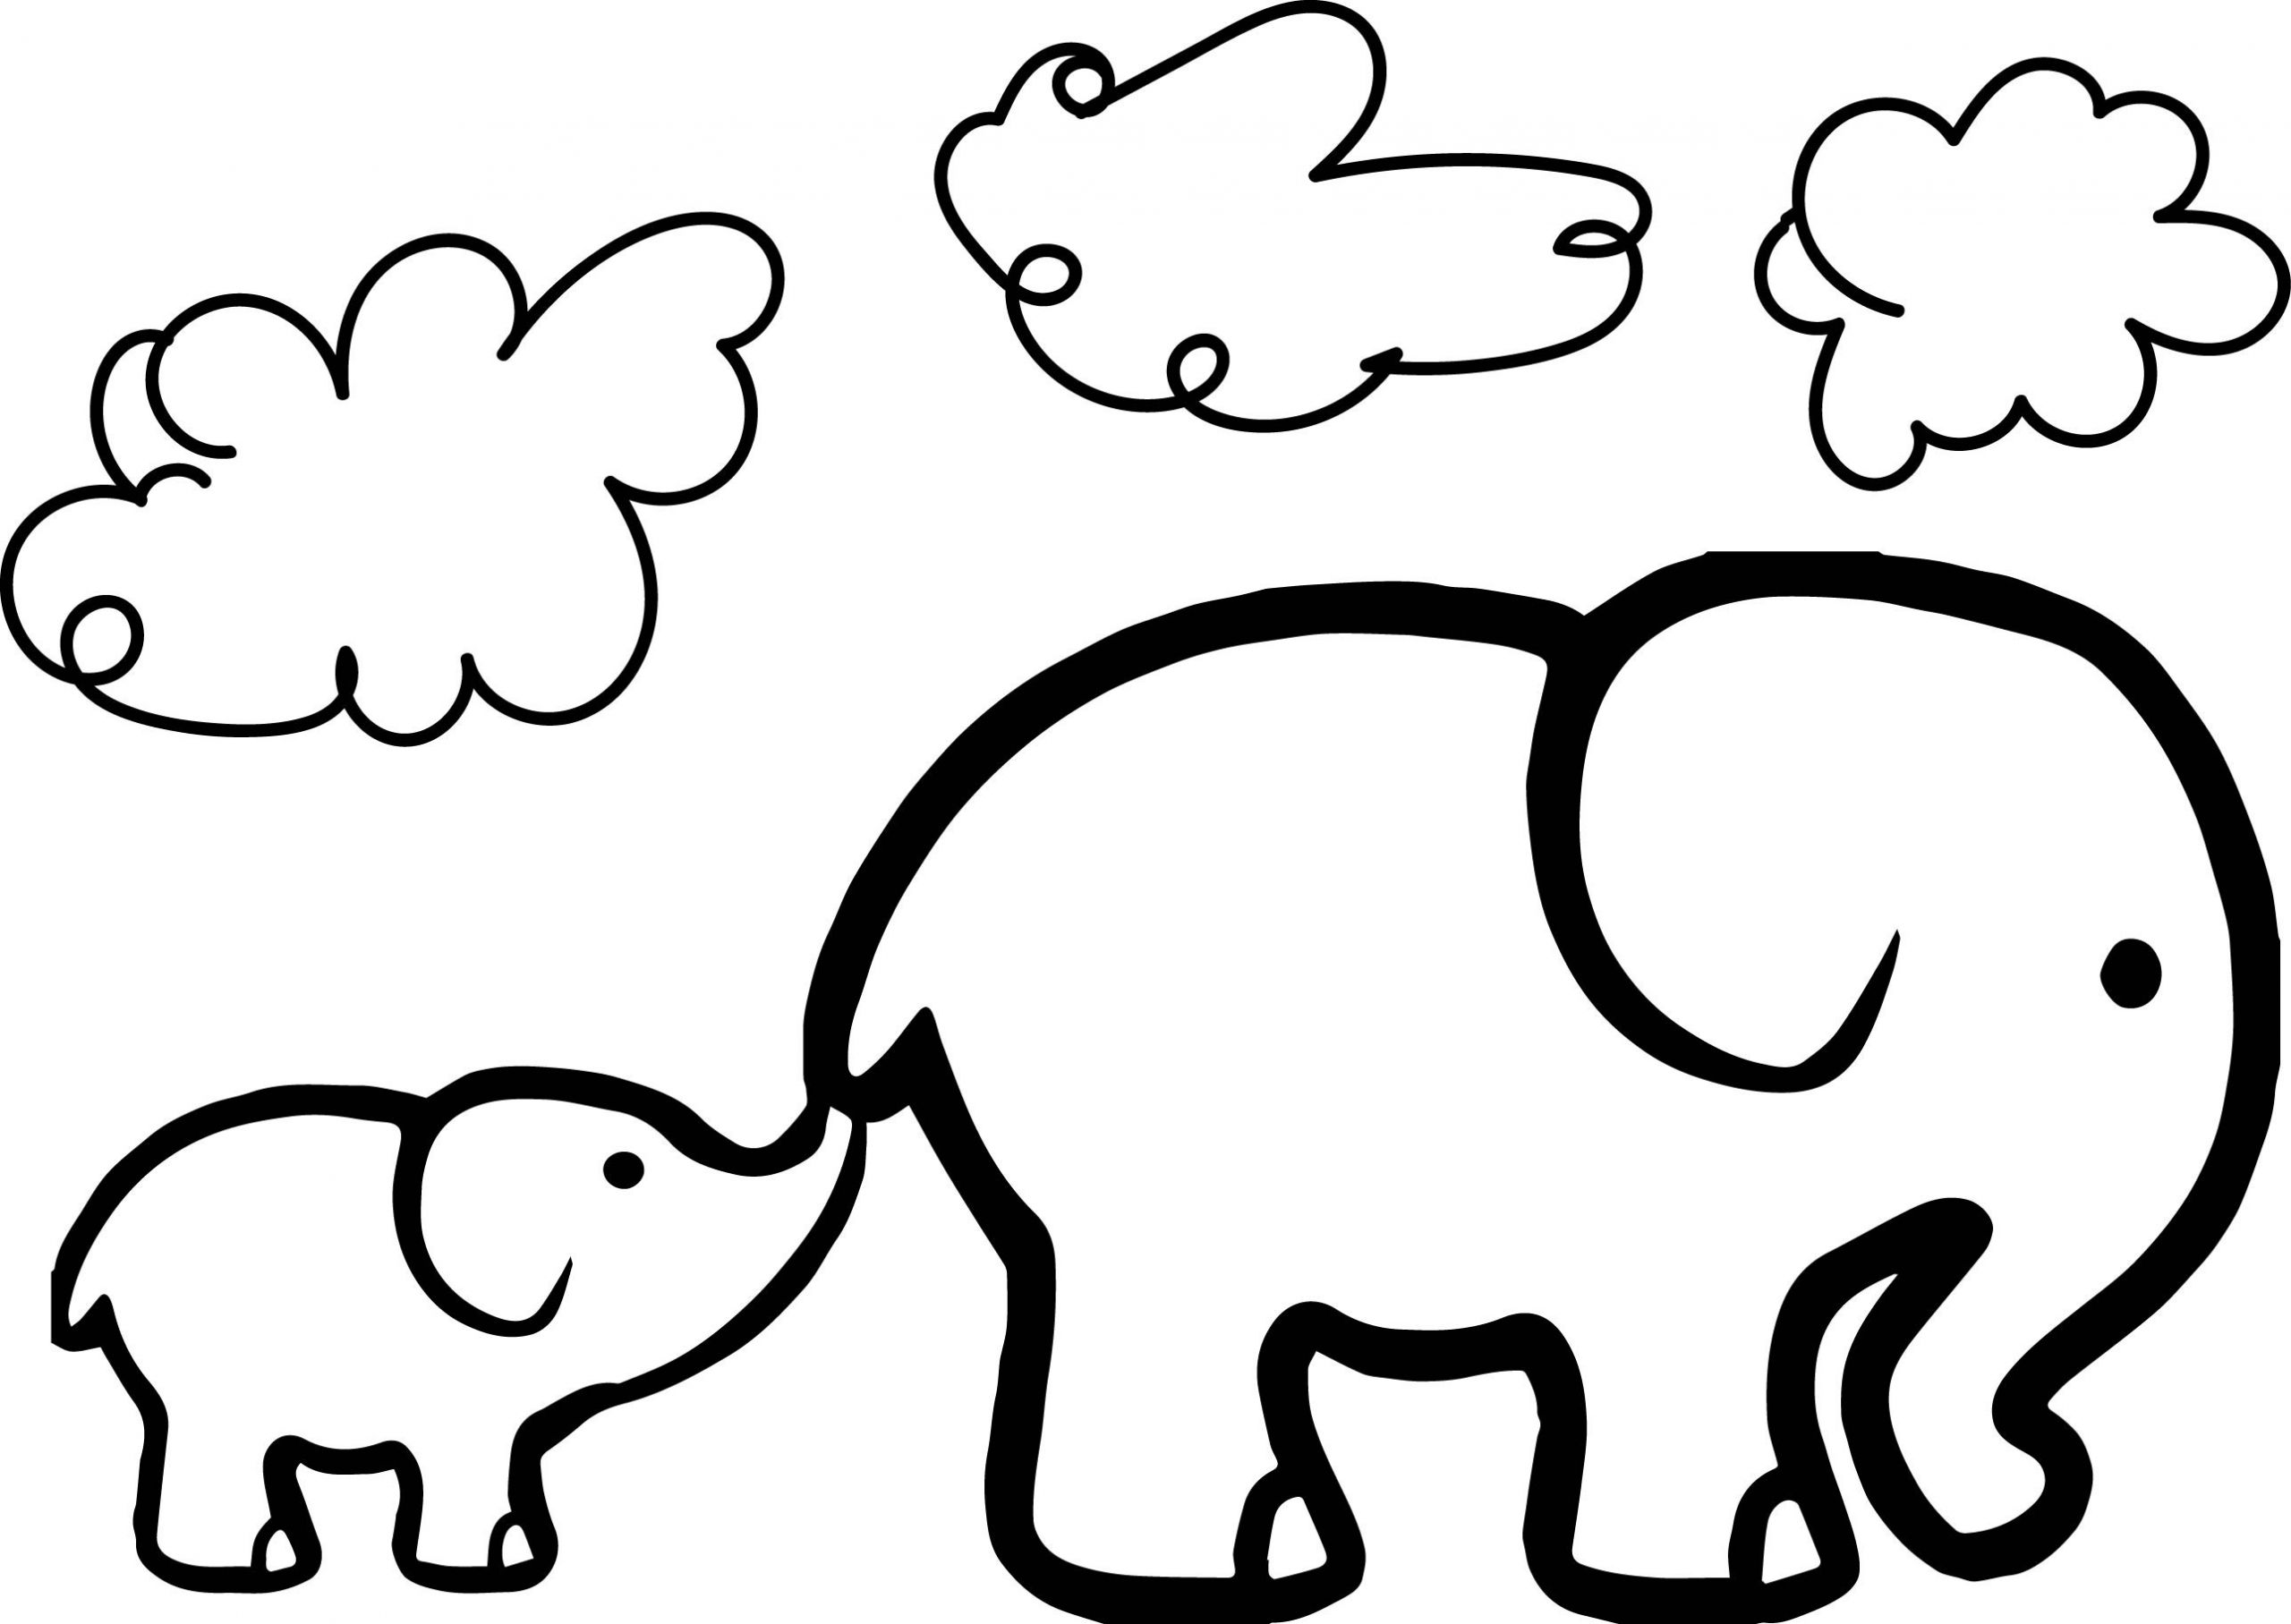 Baby Elephant Coloring Page
 Elephant Coloring Pages